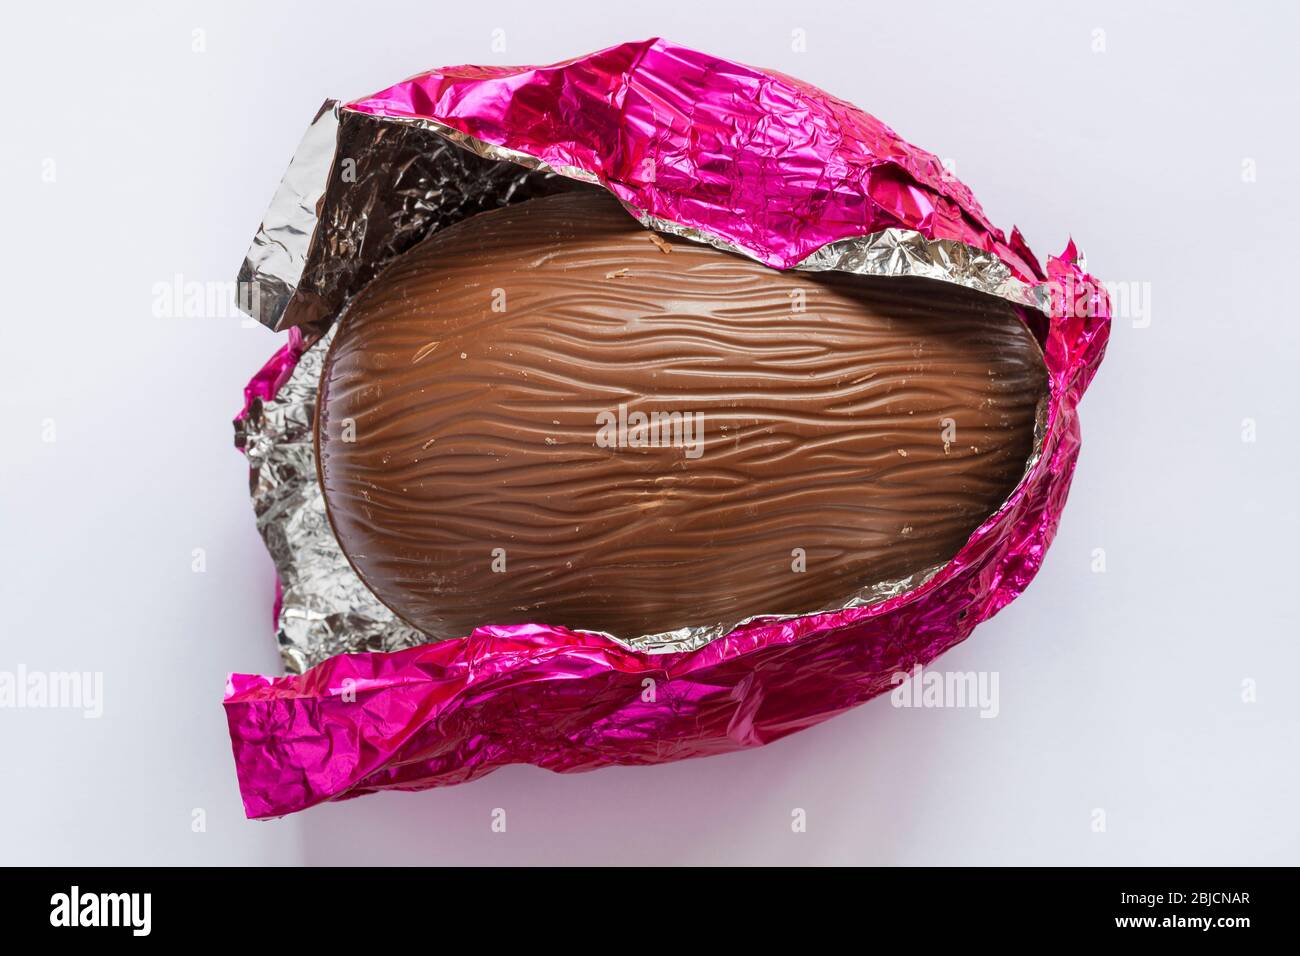 unwrapped Milk chocolate Easter egg in pink silver foil isolated on white background Stock Photo